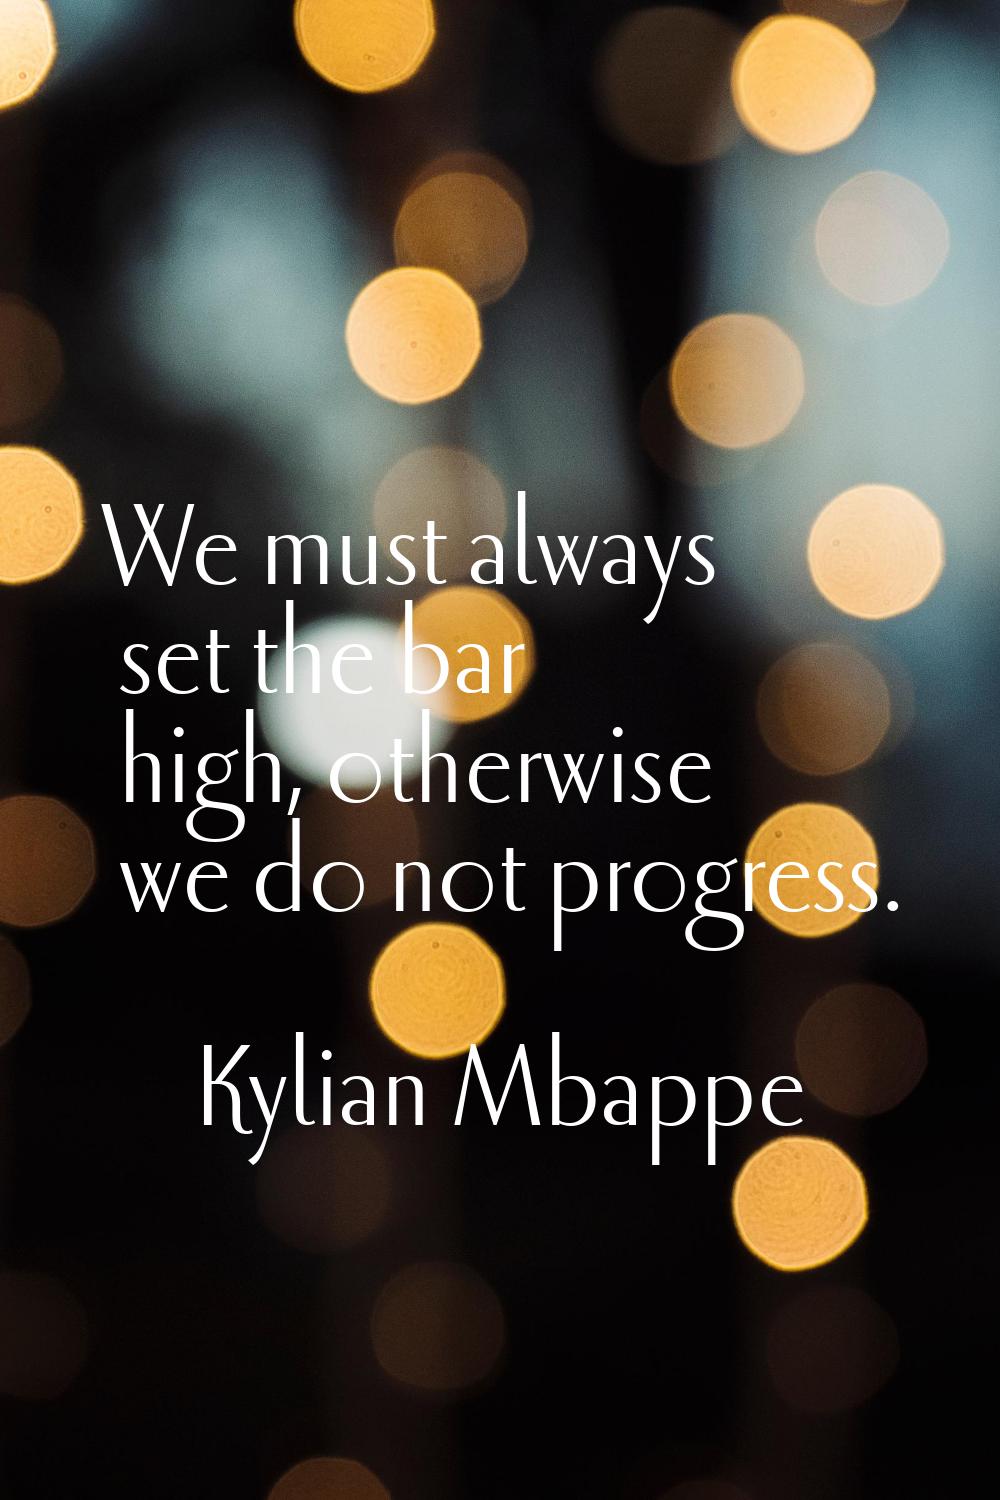 We must always set the bar high, otherwise we do not progress.